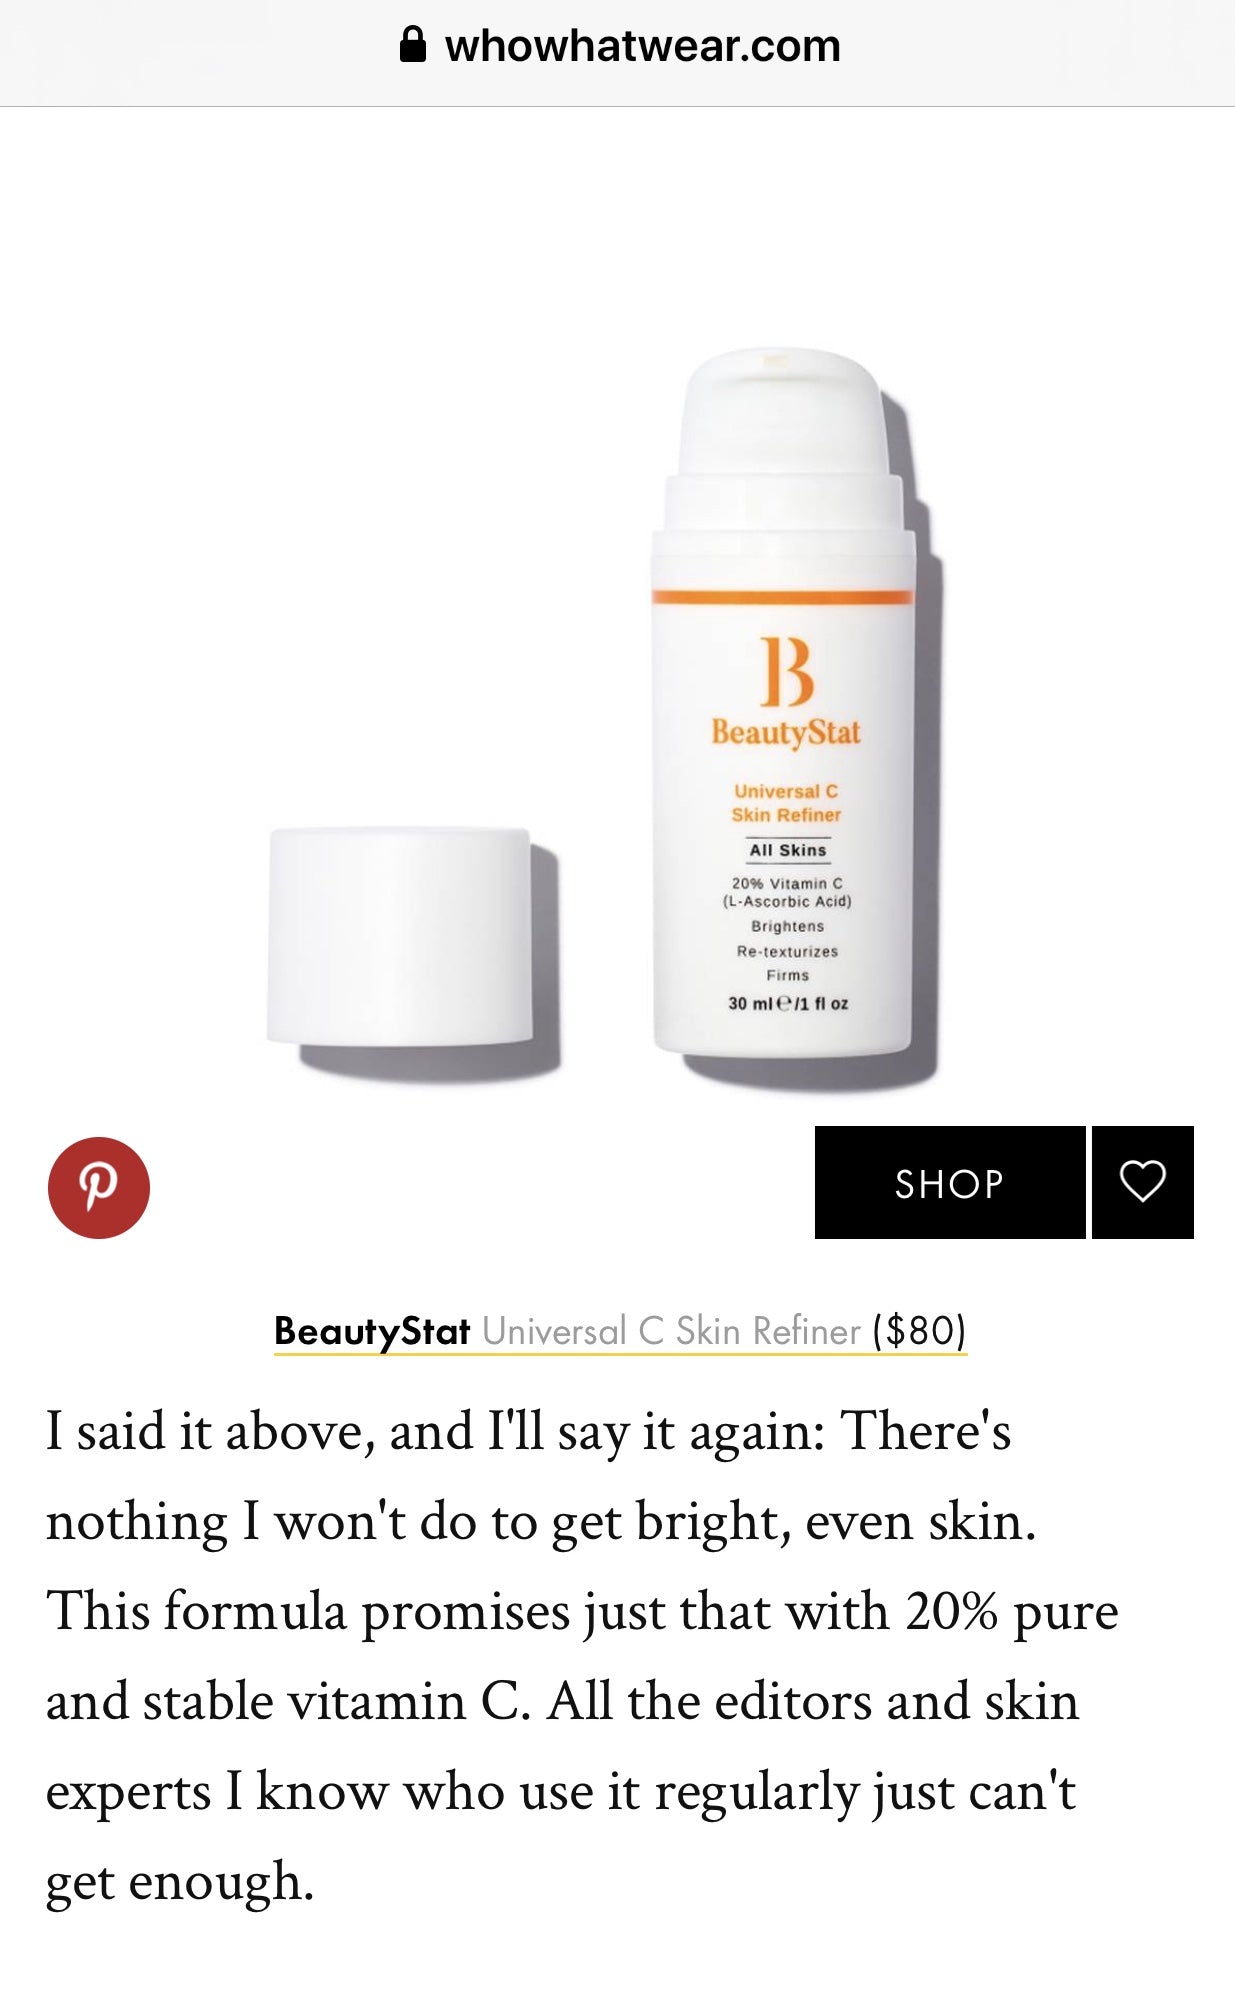 In WhoWhatWear: BeautyStat Universal C Skin Refiner Considered Best Beauty Product To Buy On Sale